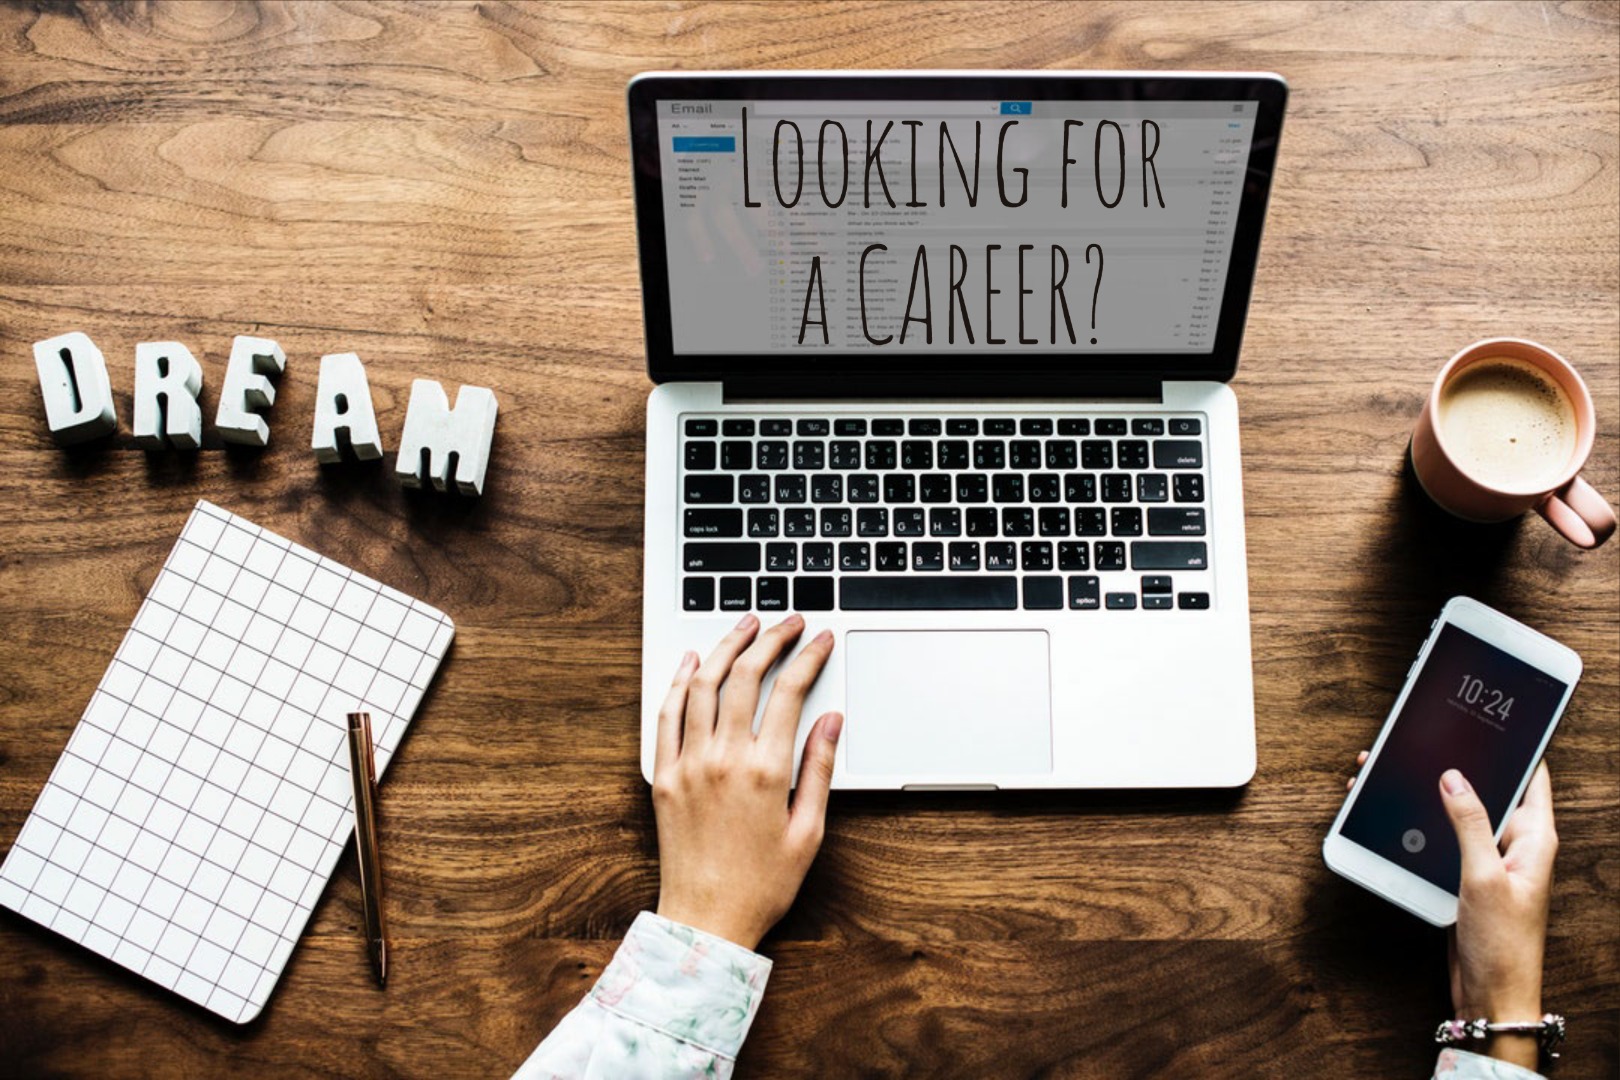 Laptop with text "looking for a career?" blocks nearby spell dream